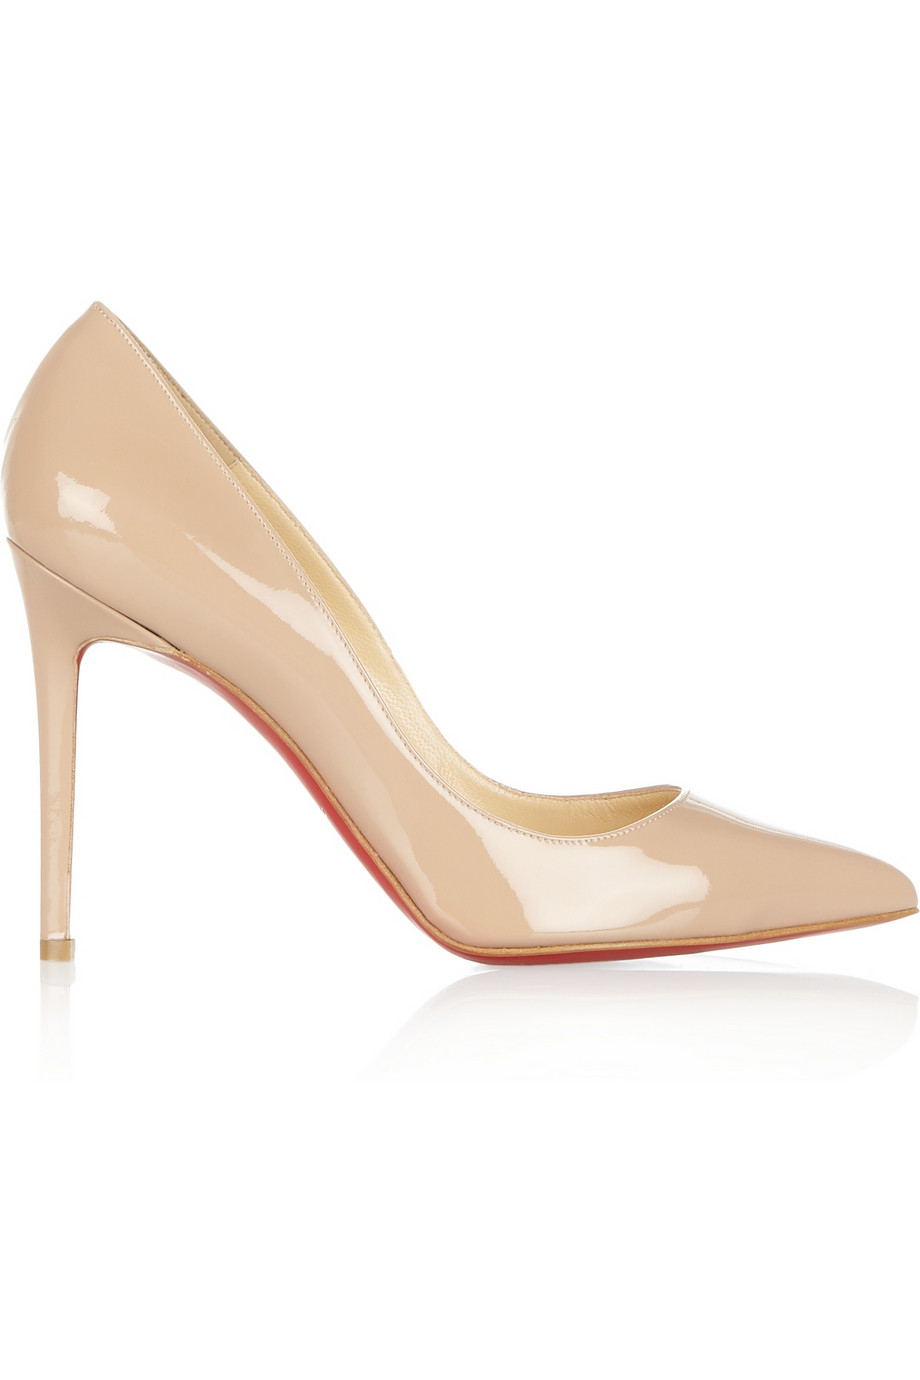 Lyst - Christian Louboutin The Pigalle 100 Patent-Leather Pumps in Natural